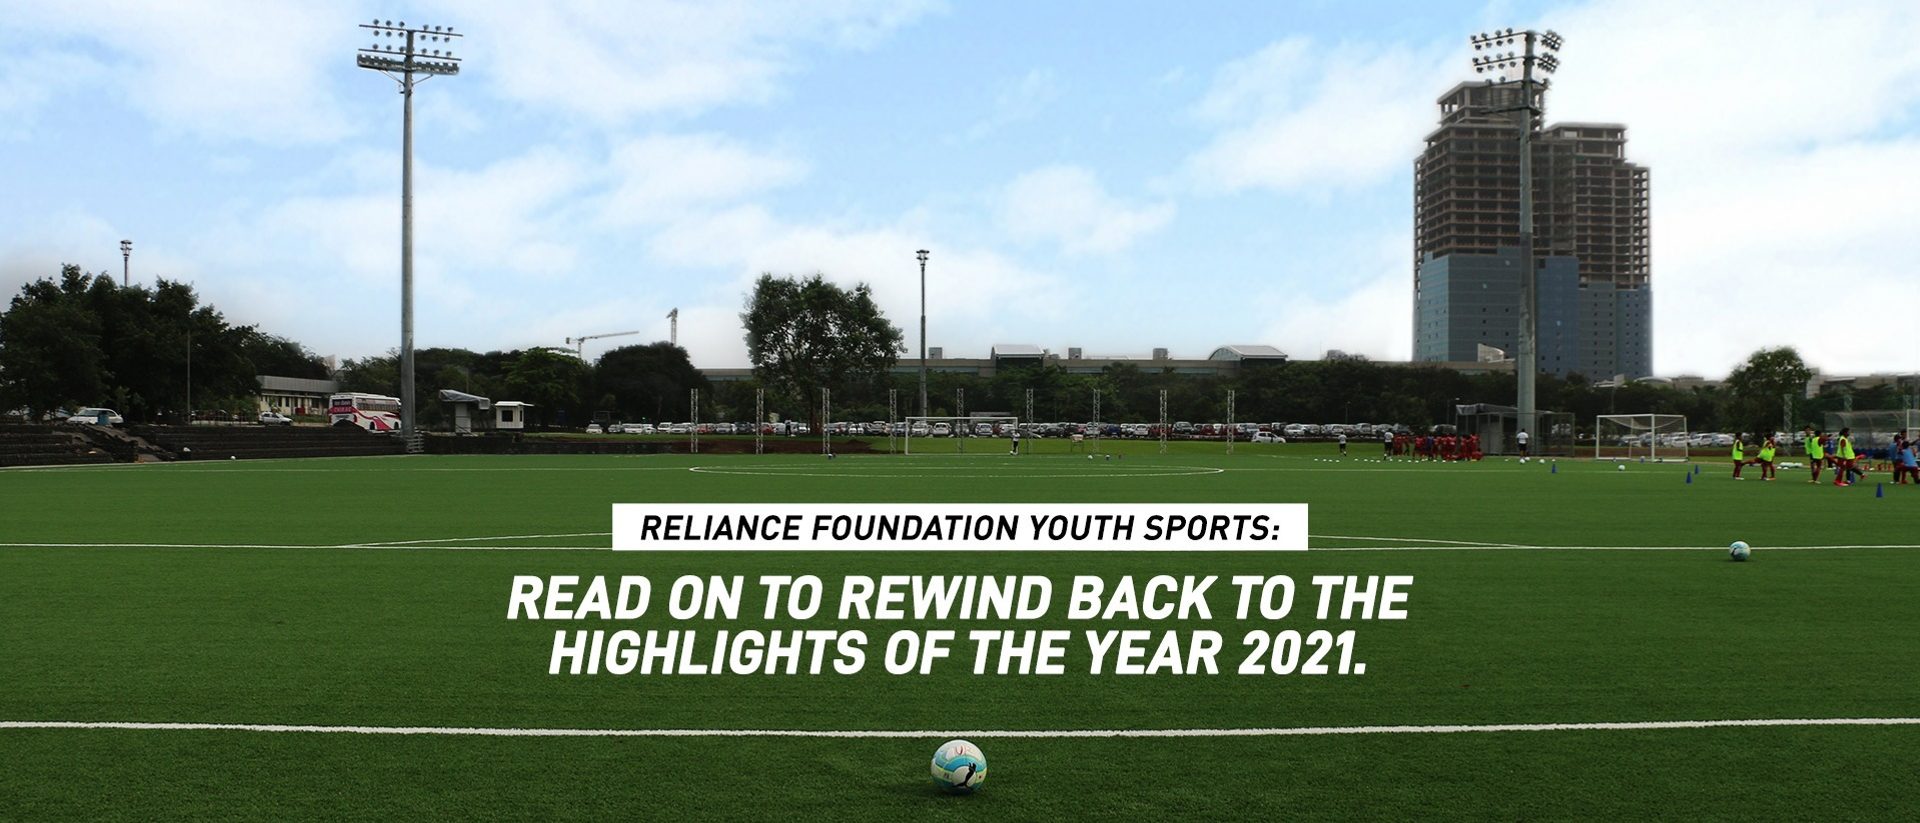 Reliance Foundation Youth Sports: Highlights of the Year